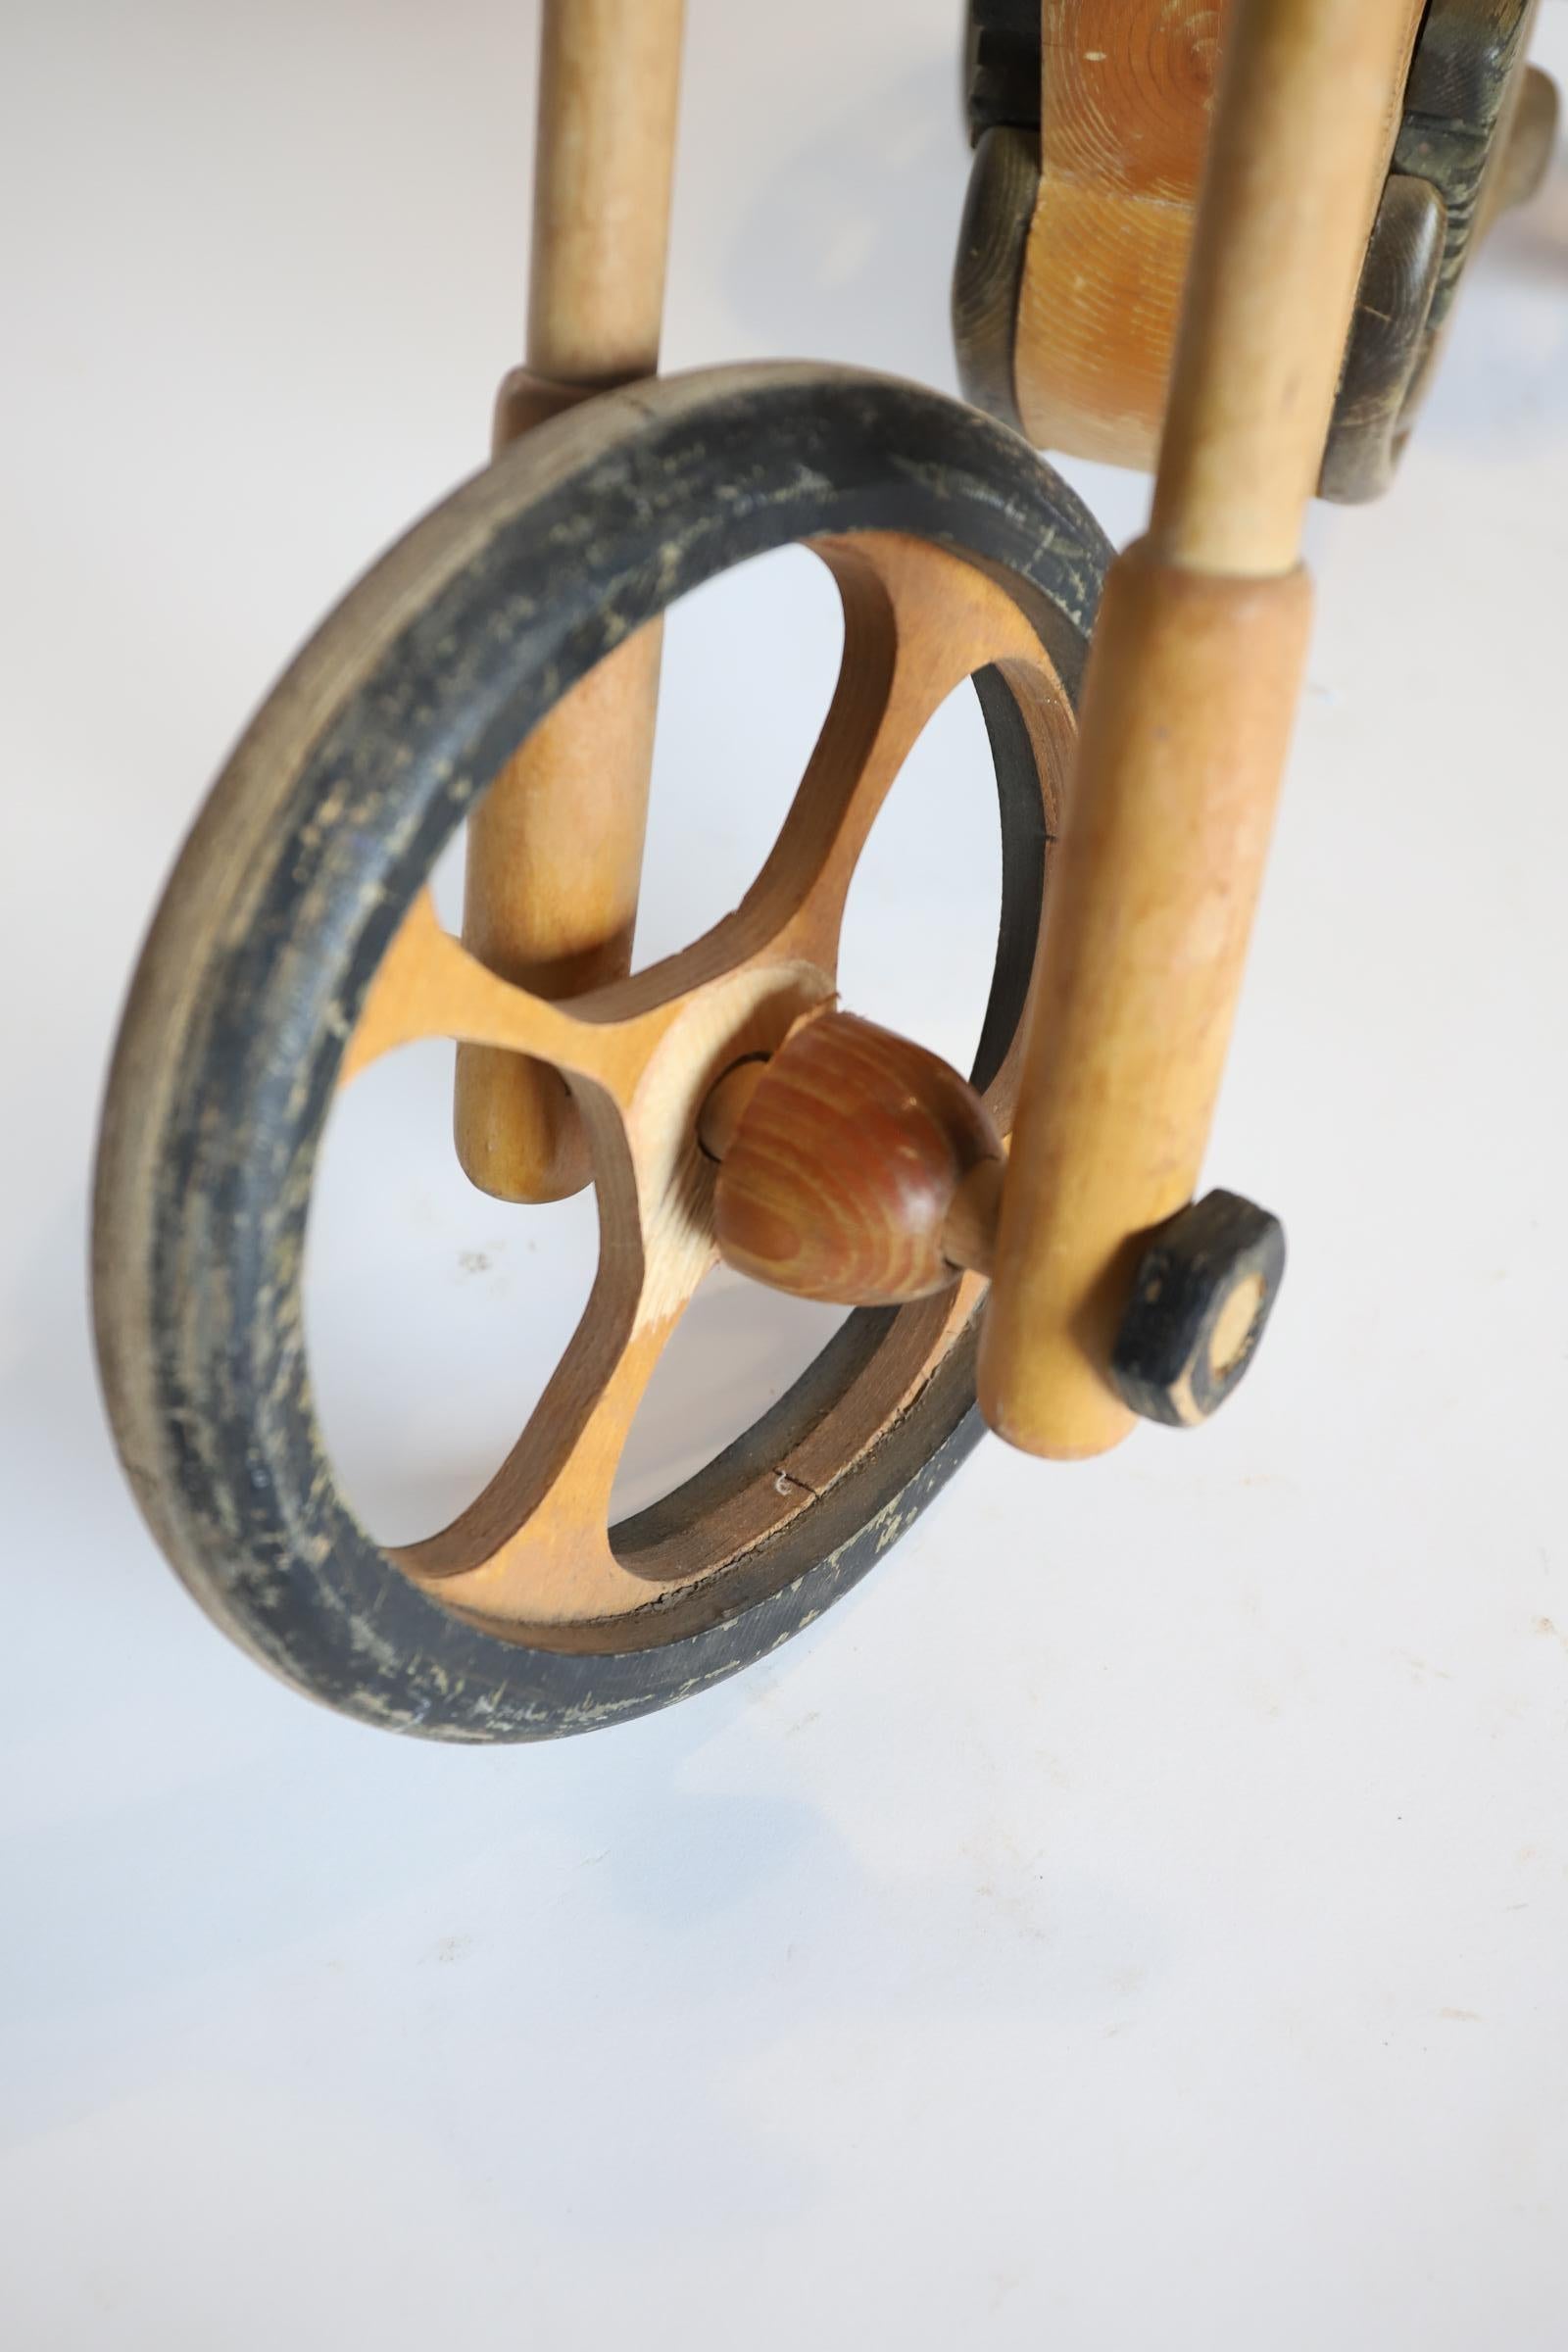 wooden toy motorcycle